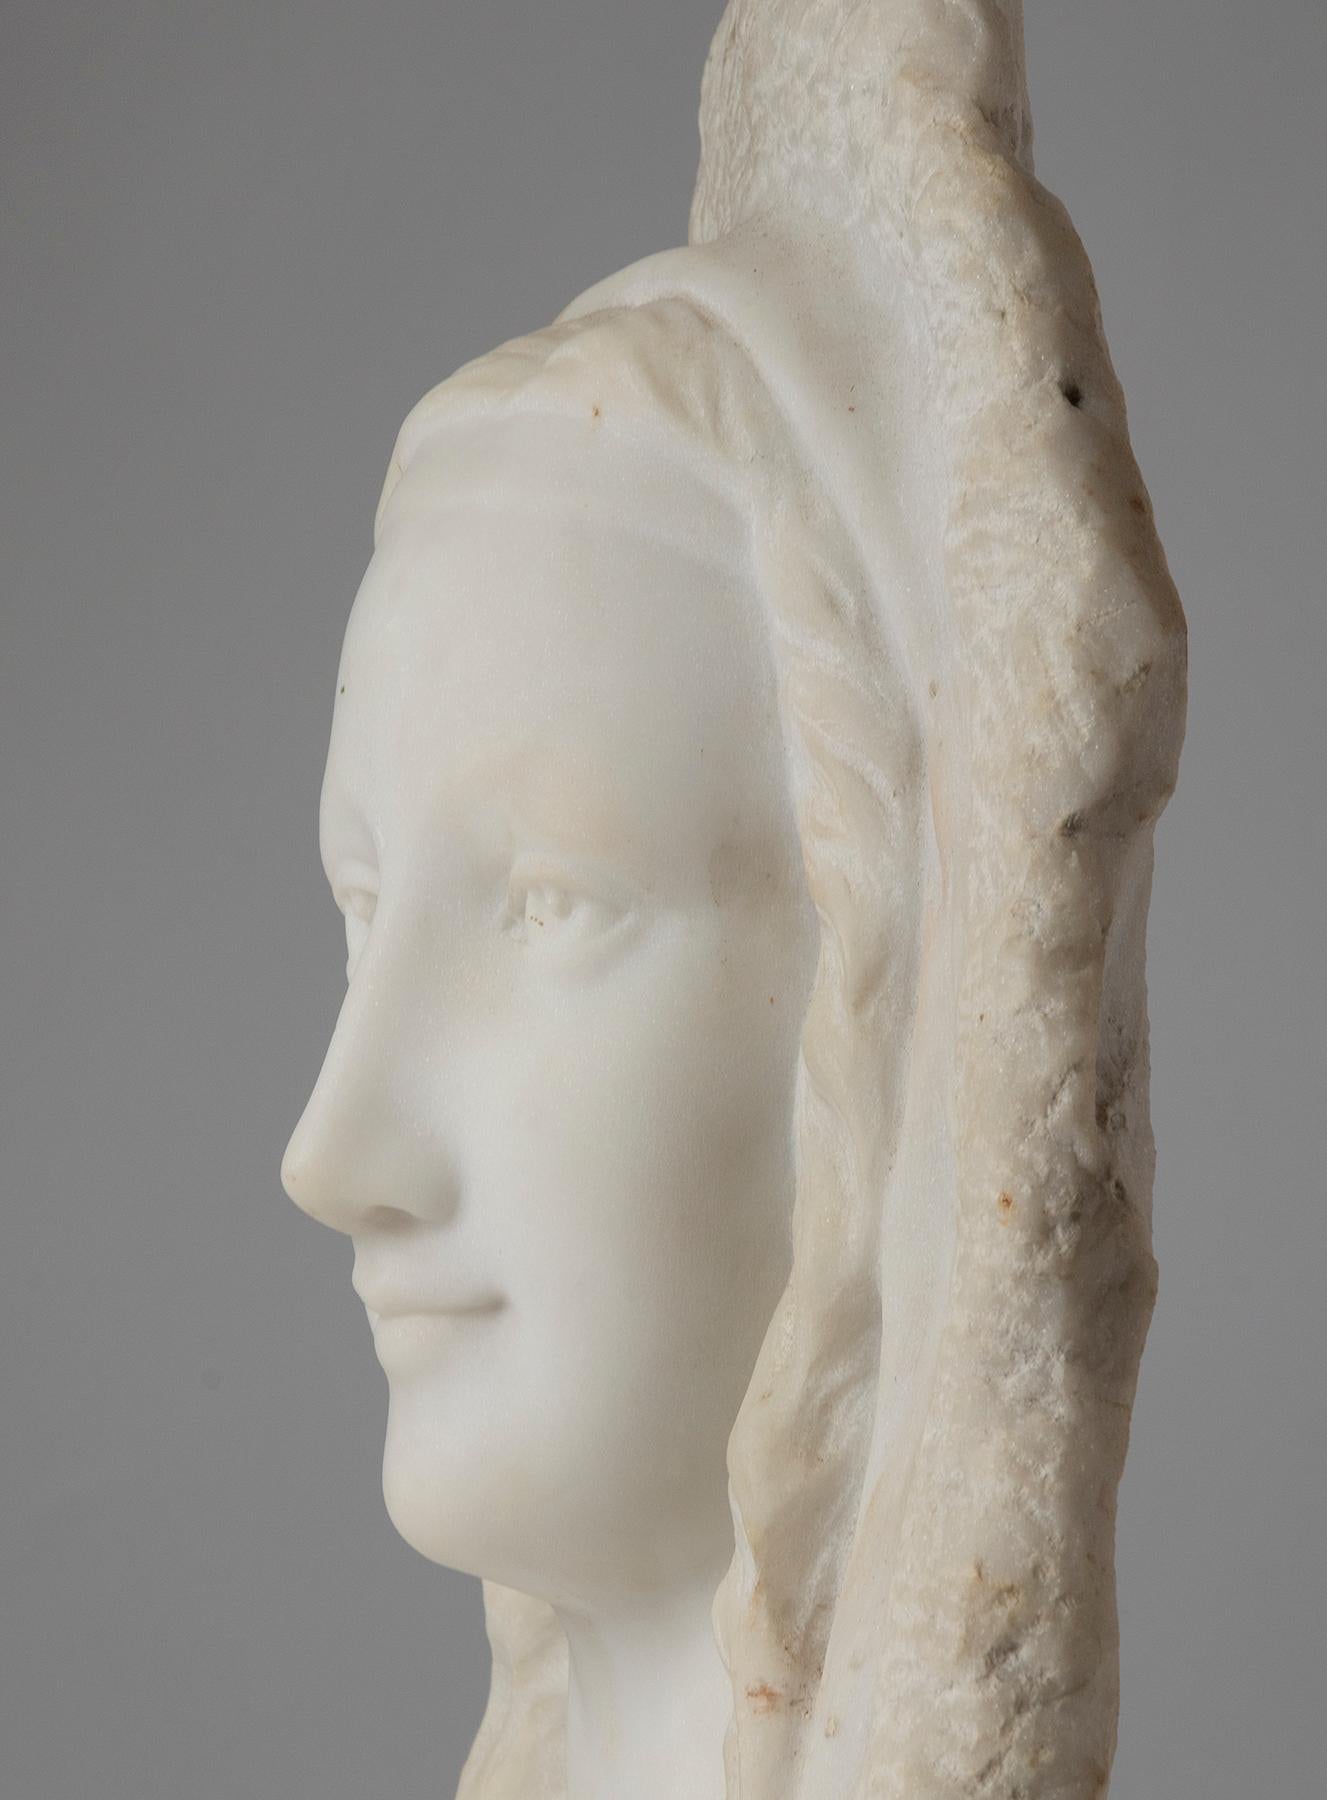 French 19th Century Carrara Marble Sculpture Portrait of Woman, Signed LeBrun For Sale 4